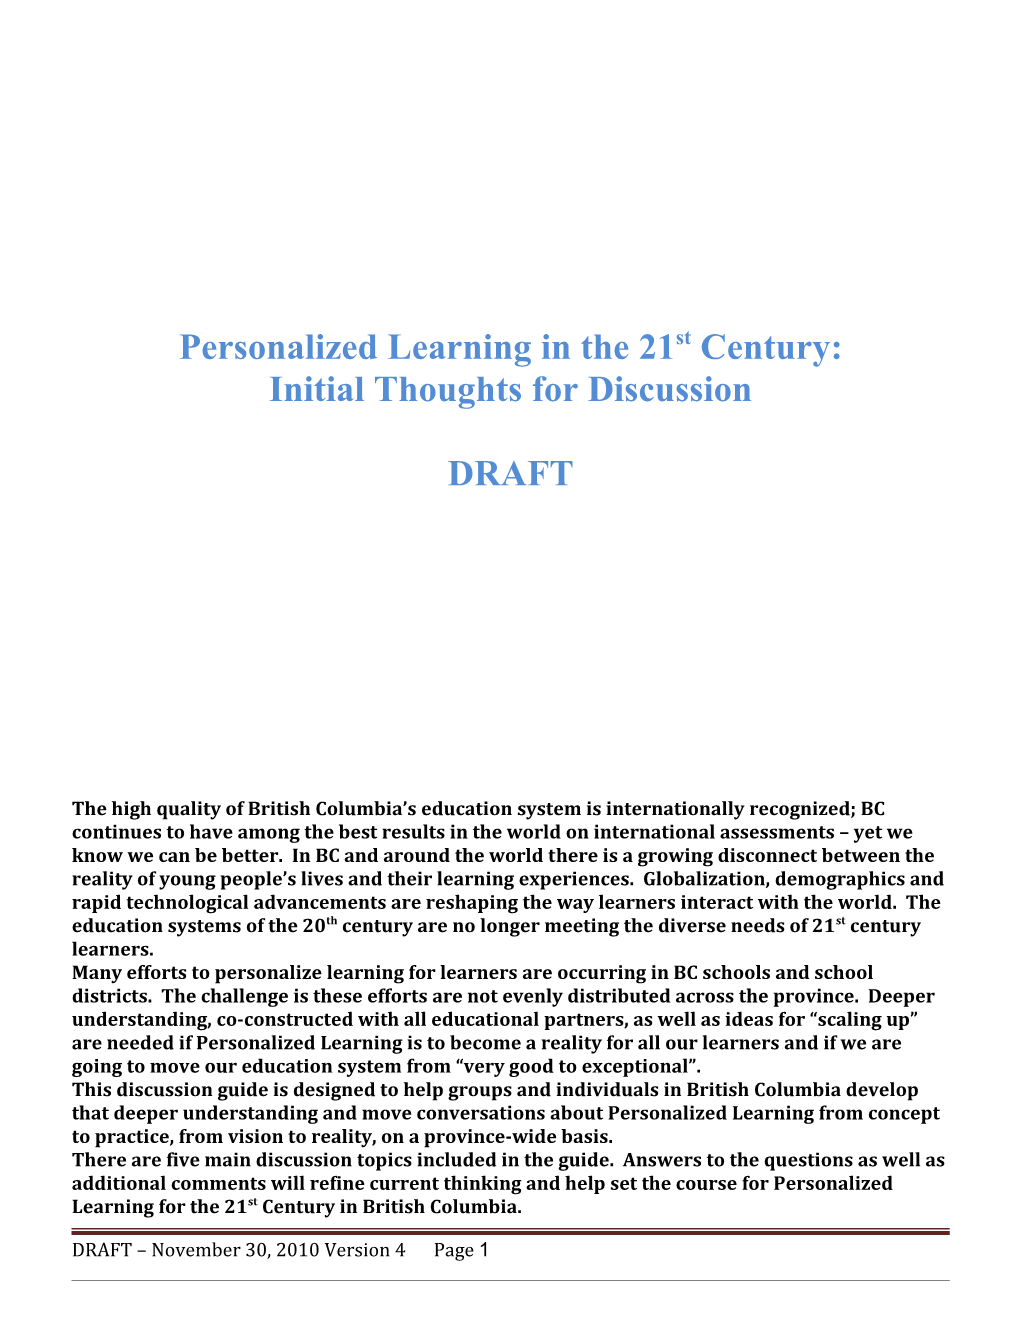 Personalized Learning for the 21St Century